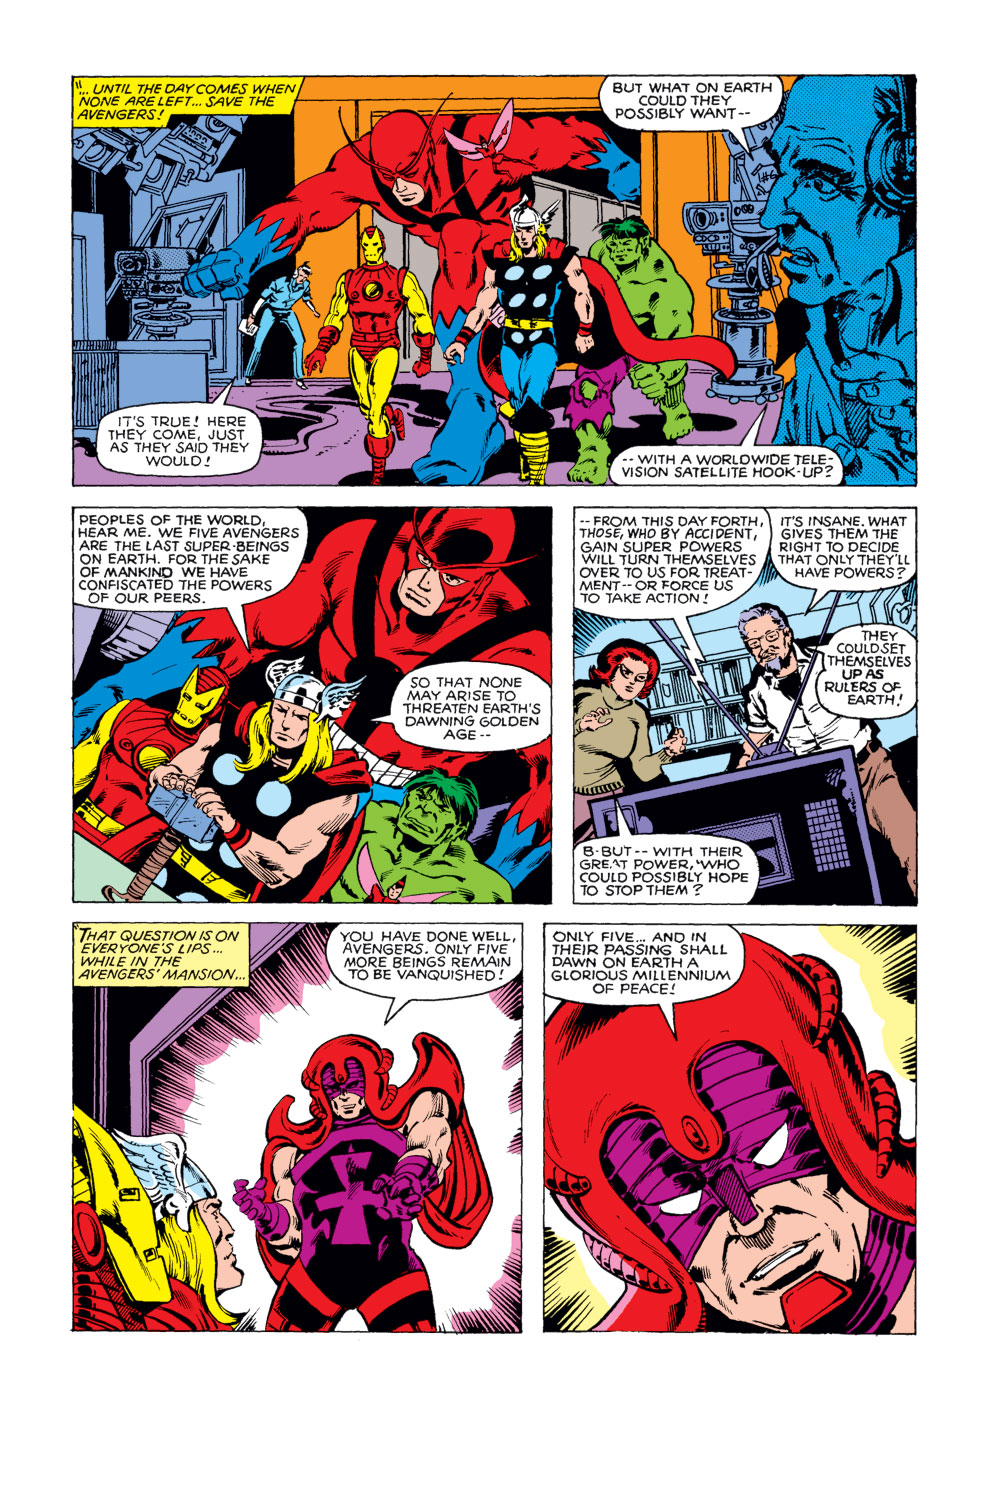 What If? (1977) issue 29 - The Avengers defeated everybody - Page 8